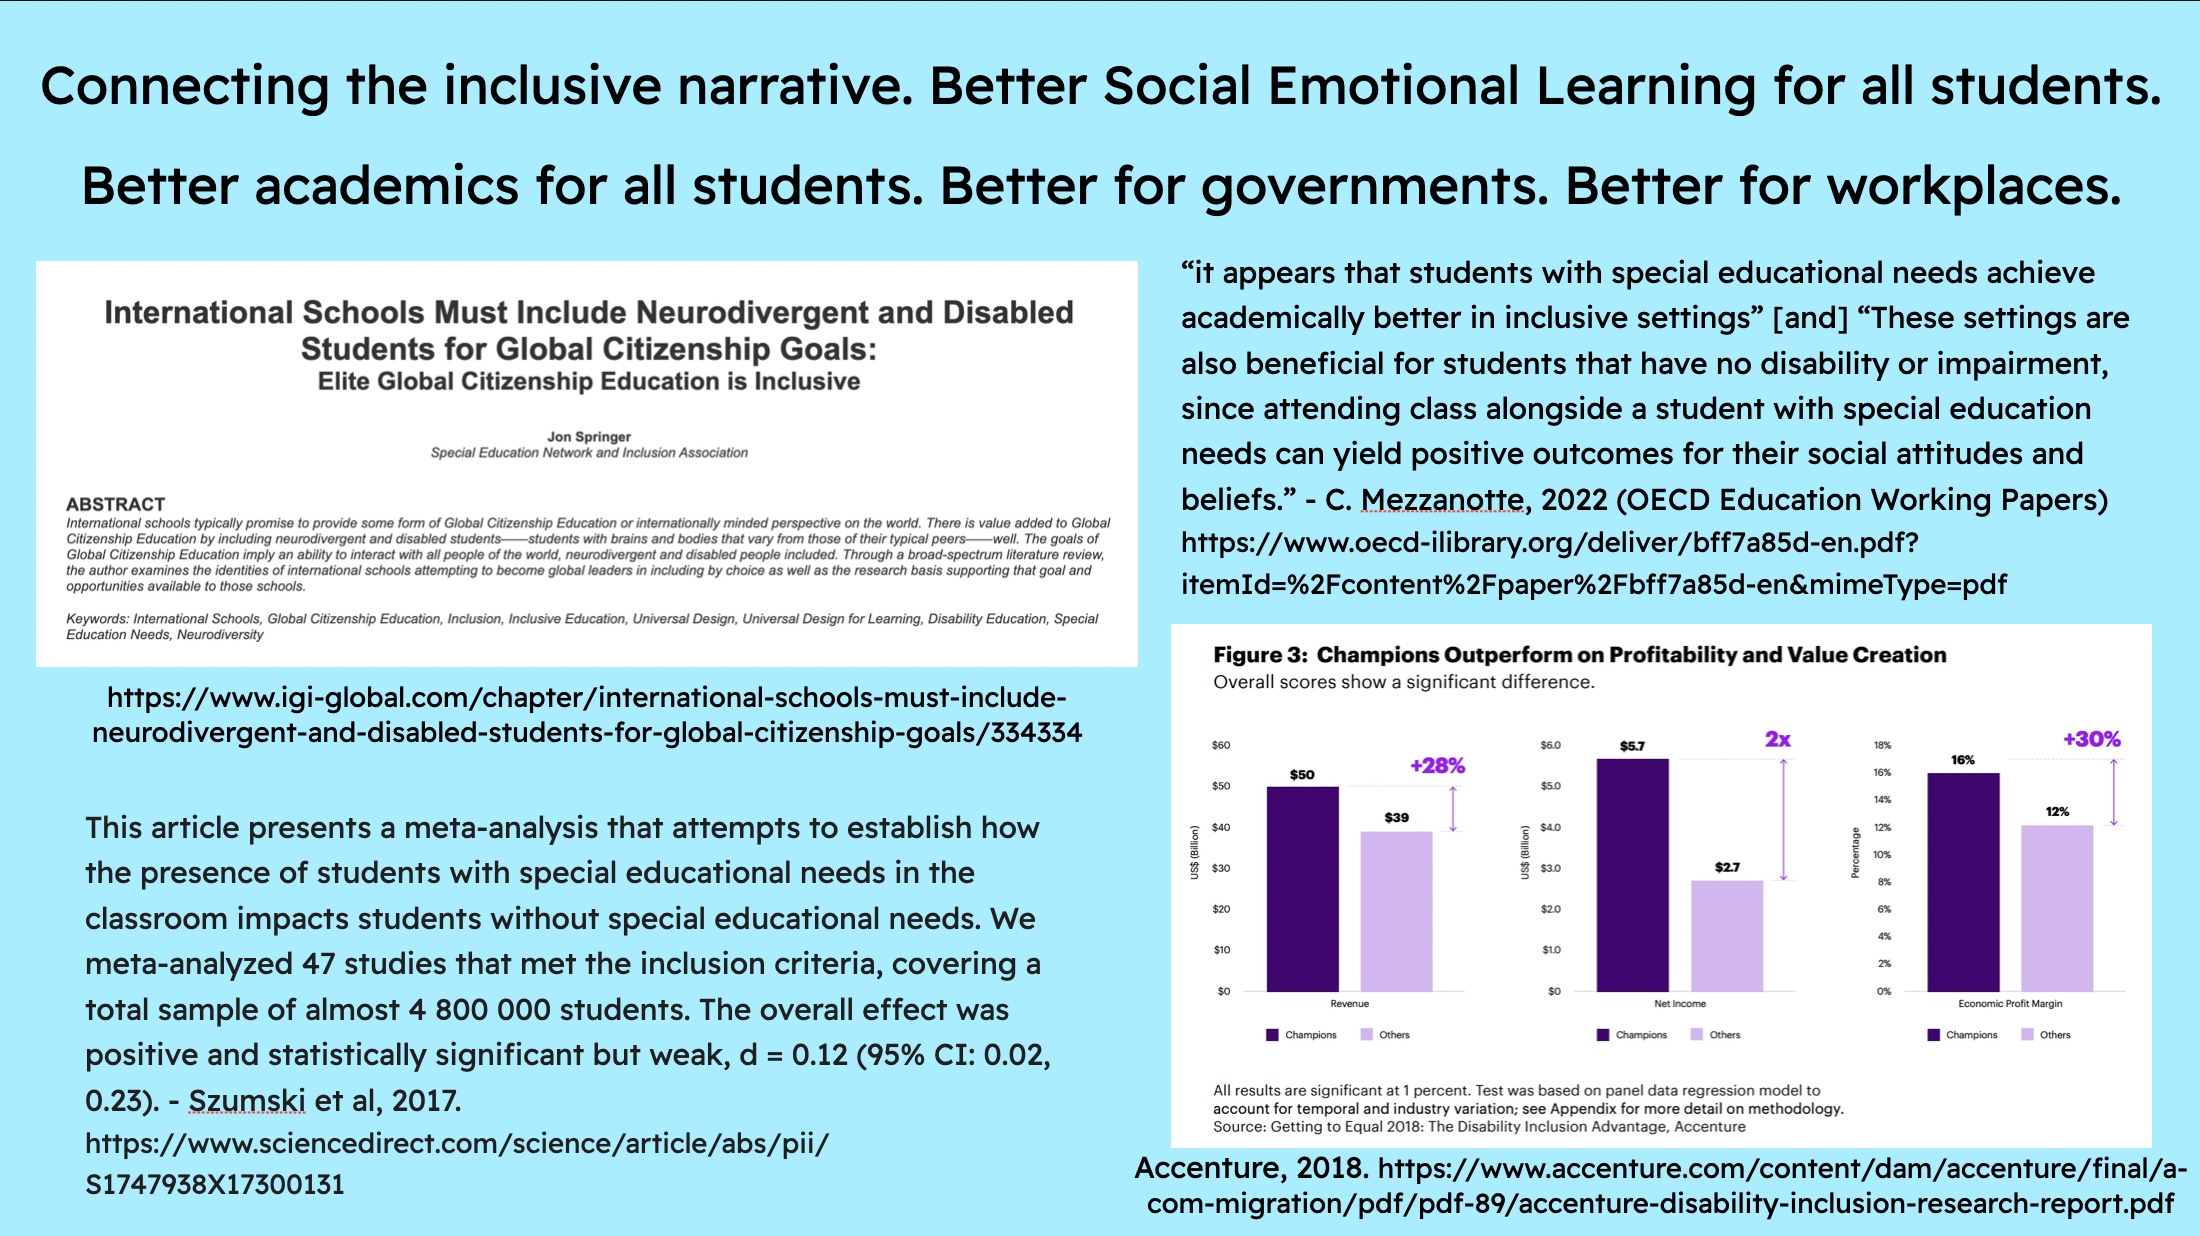 Slide 3 titled "Connecting the inclusive narrative. Better Social Emotional Learning for all students. Better academic for all students. Better for governments. Better for Workplaces." Slide images references chapter by Jon Springer (hyperlink in text), quote from Szumski et al (quote and link in Community Hub section Pithy Quotes), quote by Cecilia Mezzanotte (hyperlink in speech text), and graphic from Accenture 2018 inclusive workplace report (link to report in Pithy Quotes) that shows inclusive workplaces are more profitable and productive.